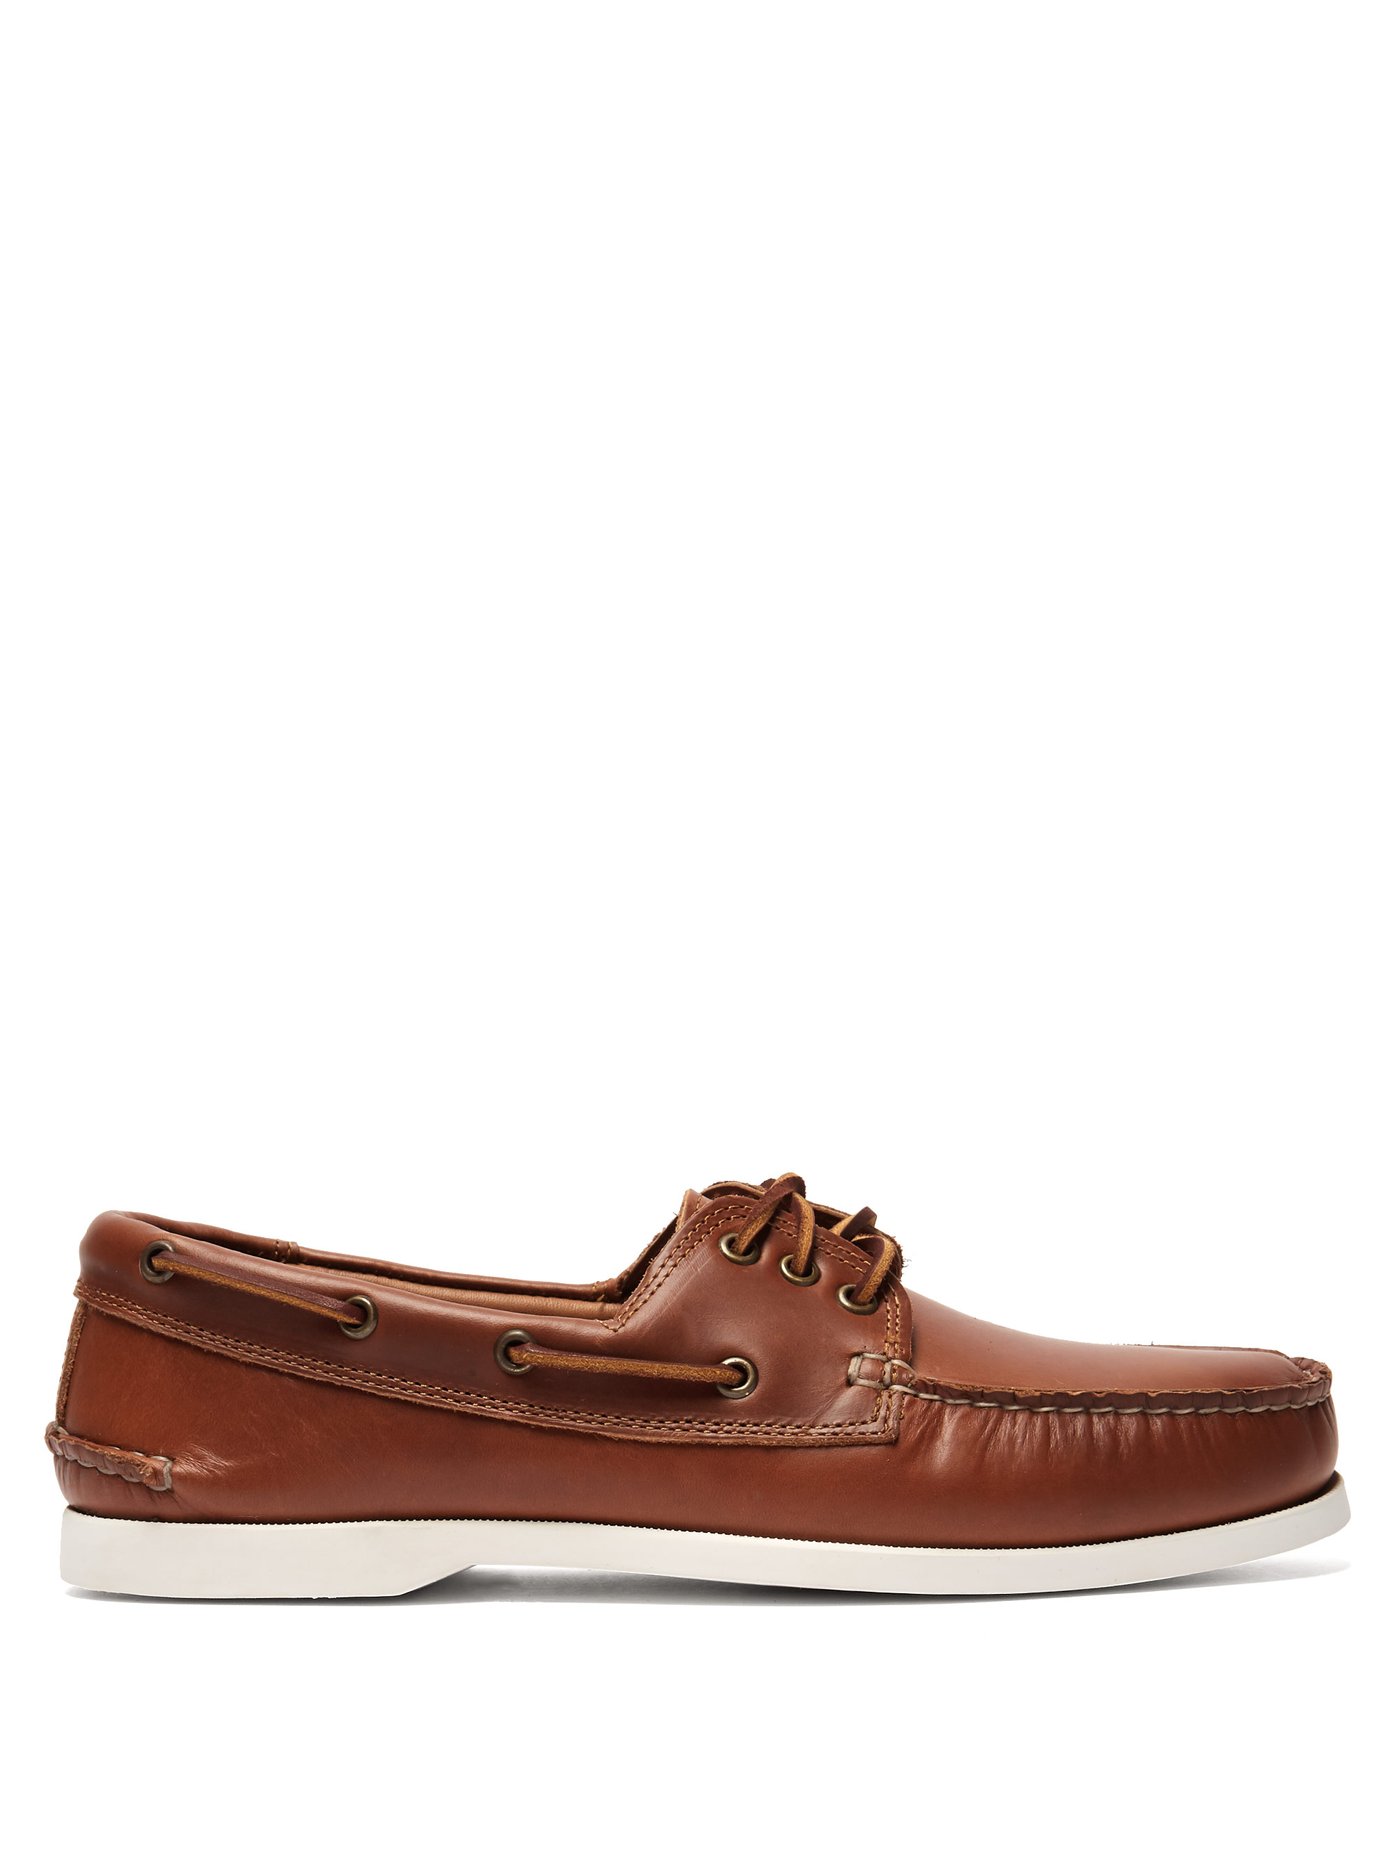 quoddy downeast boat shoes